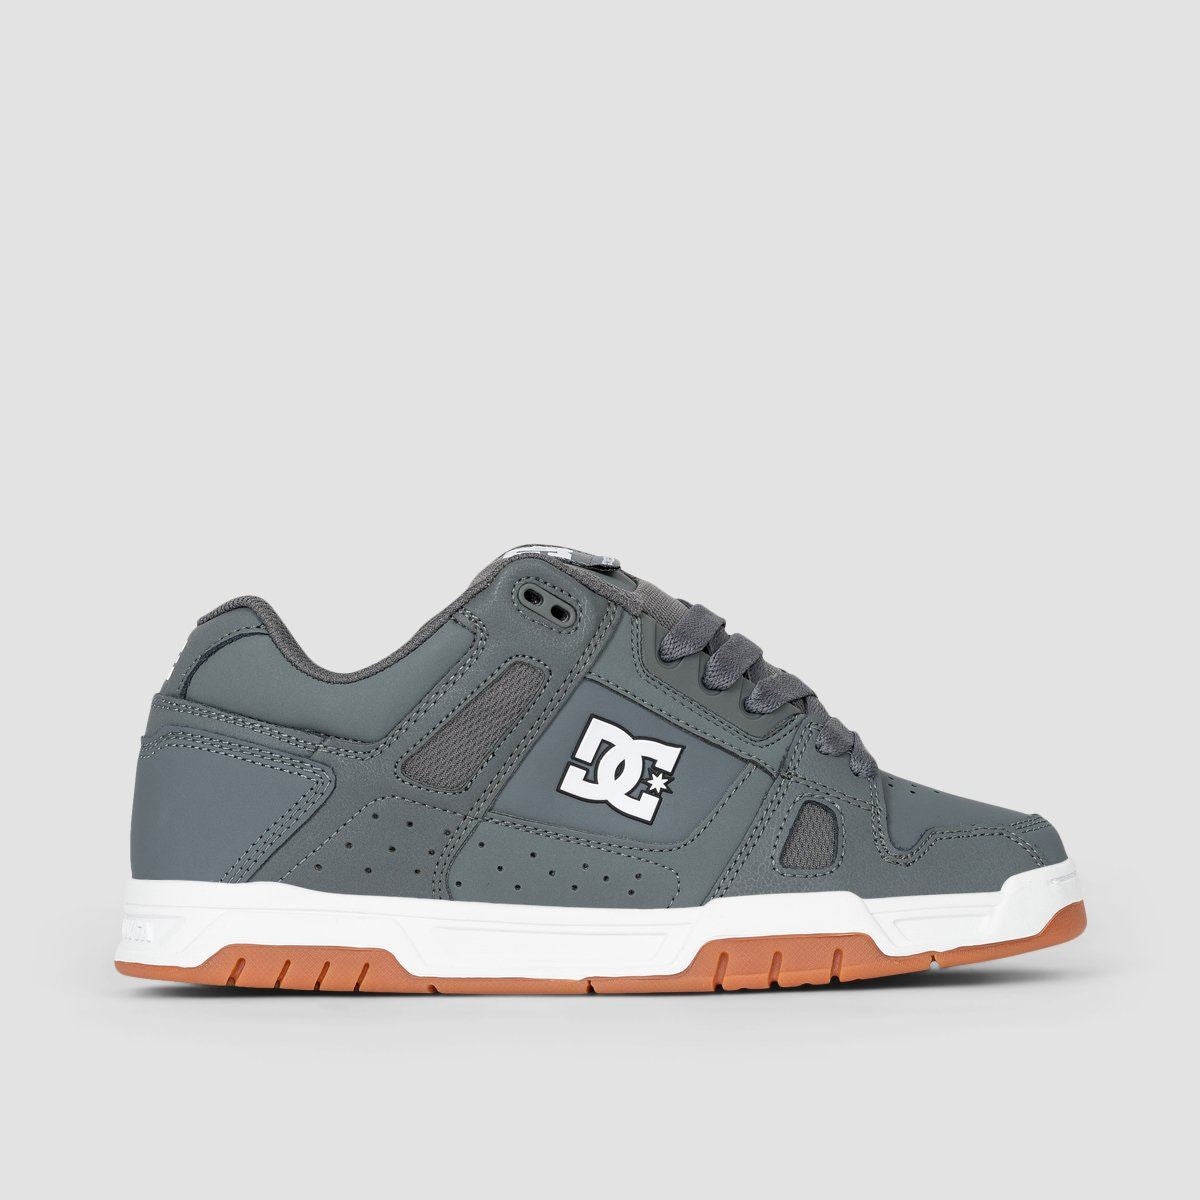 DC Stag Shoes - Grey/Gum